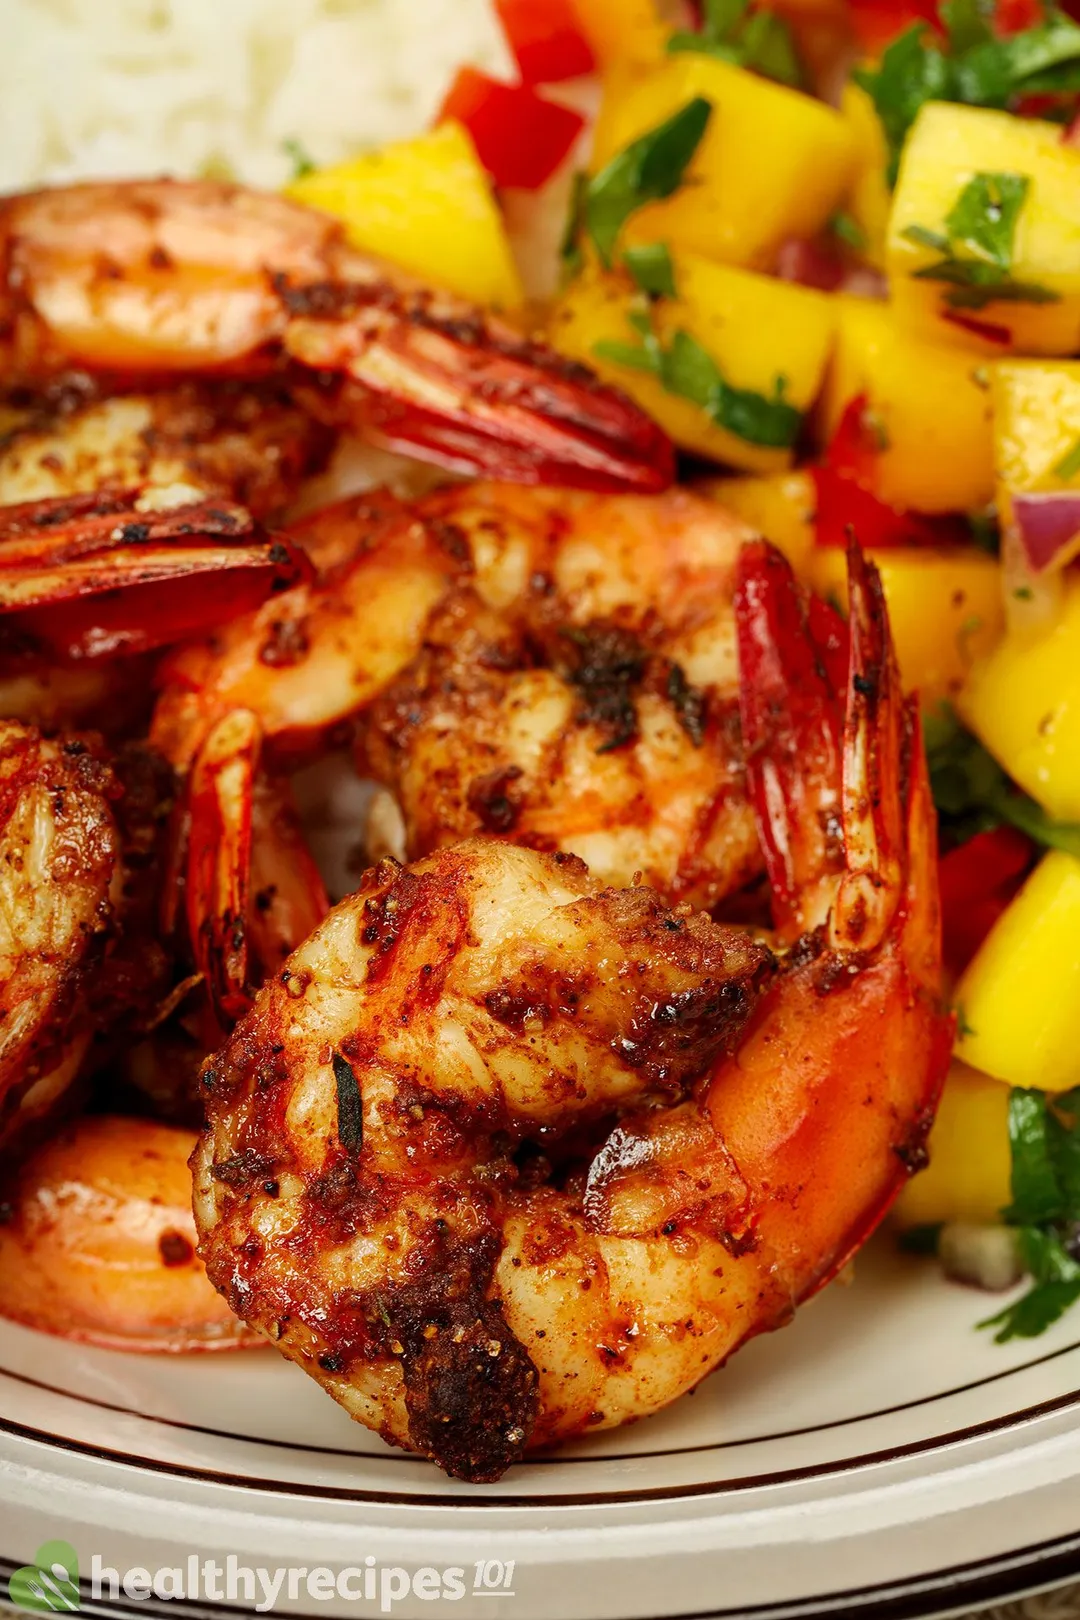 What Flavors Goes Well With Simple Shrimp Recipes